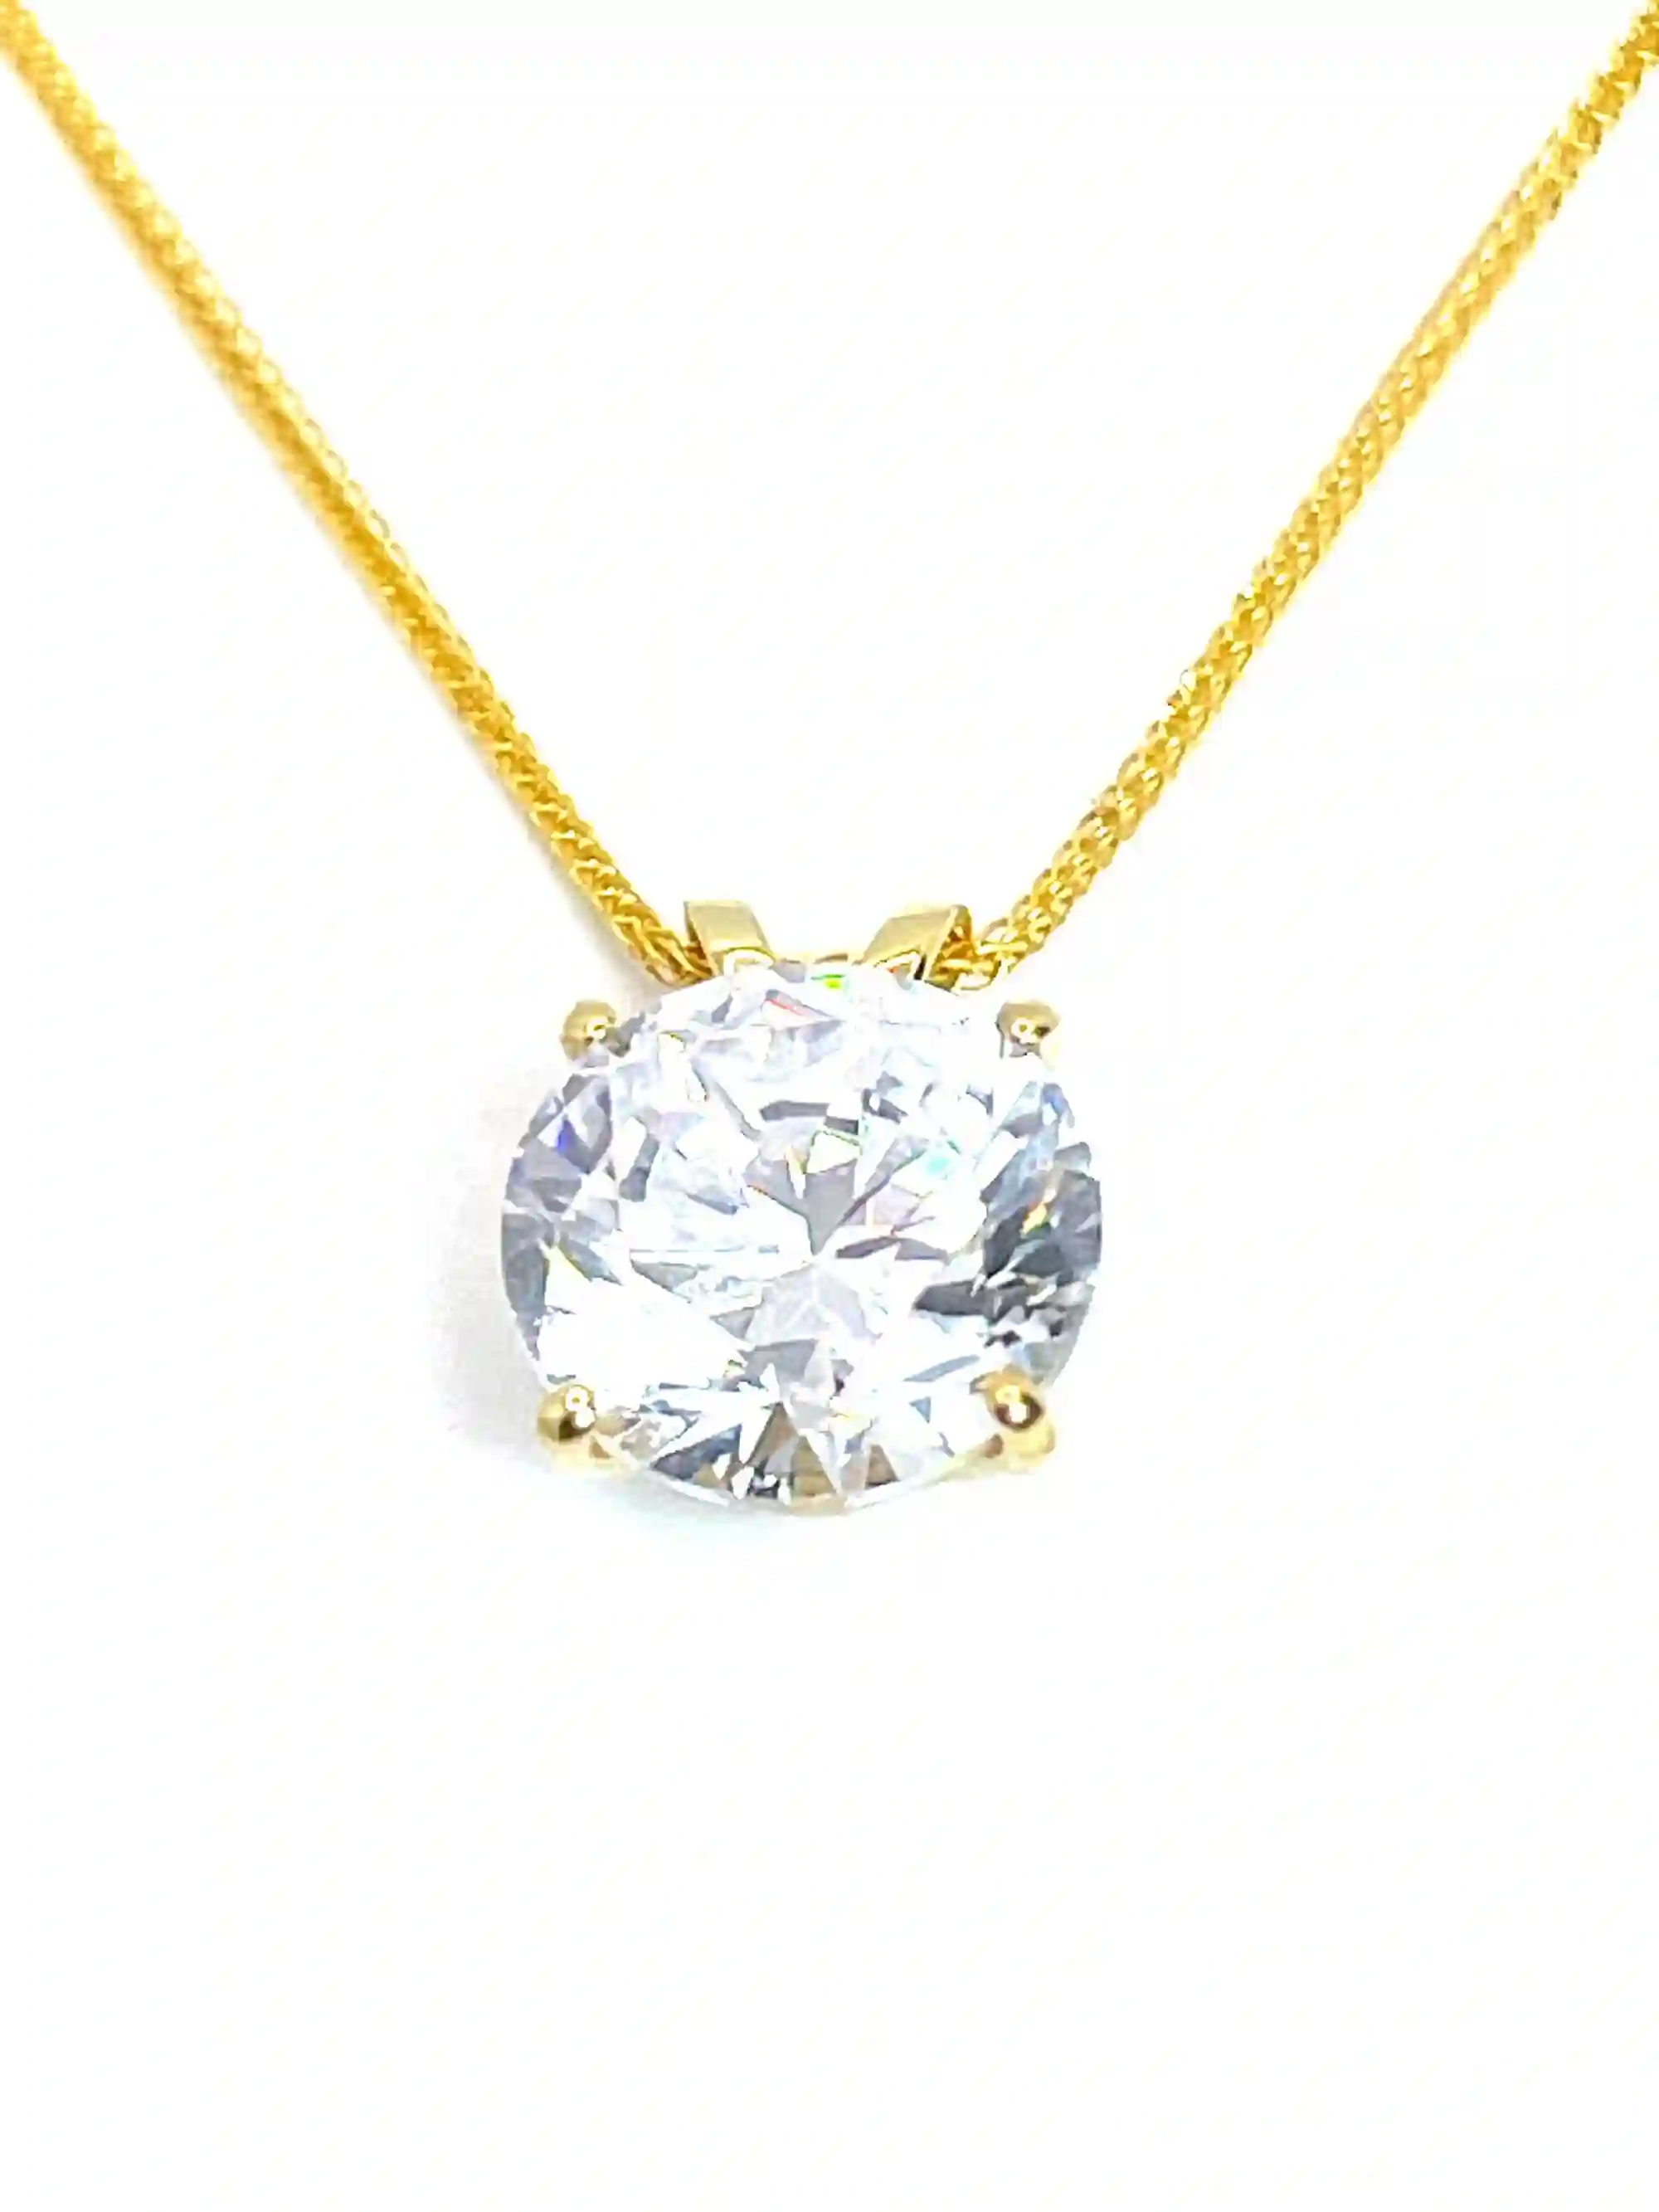 Solid 18K GOLD, 1.5ct,Bridal Necklace, DIAMOND Pendant SOLITAIRE 8mm Handmade Jewelry Gift for Bride Diamond Necklace 18